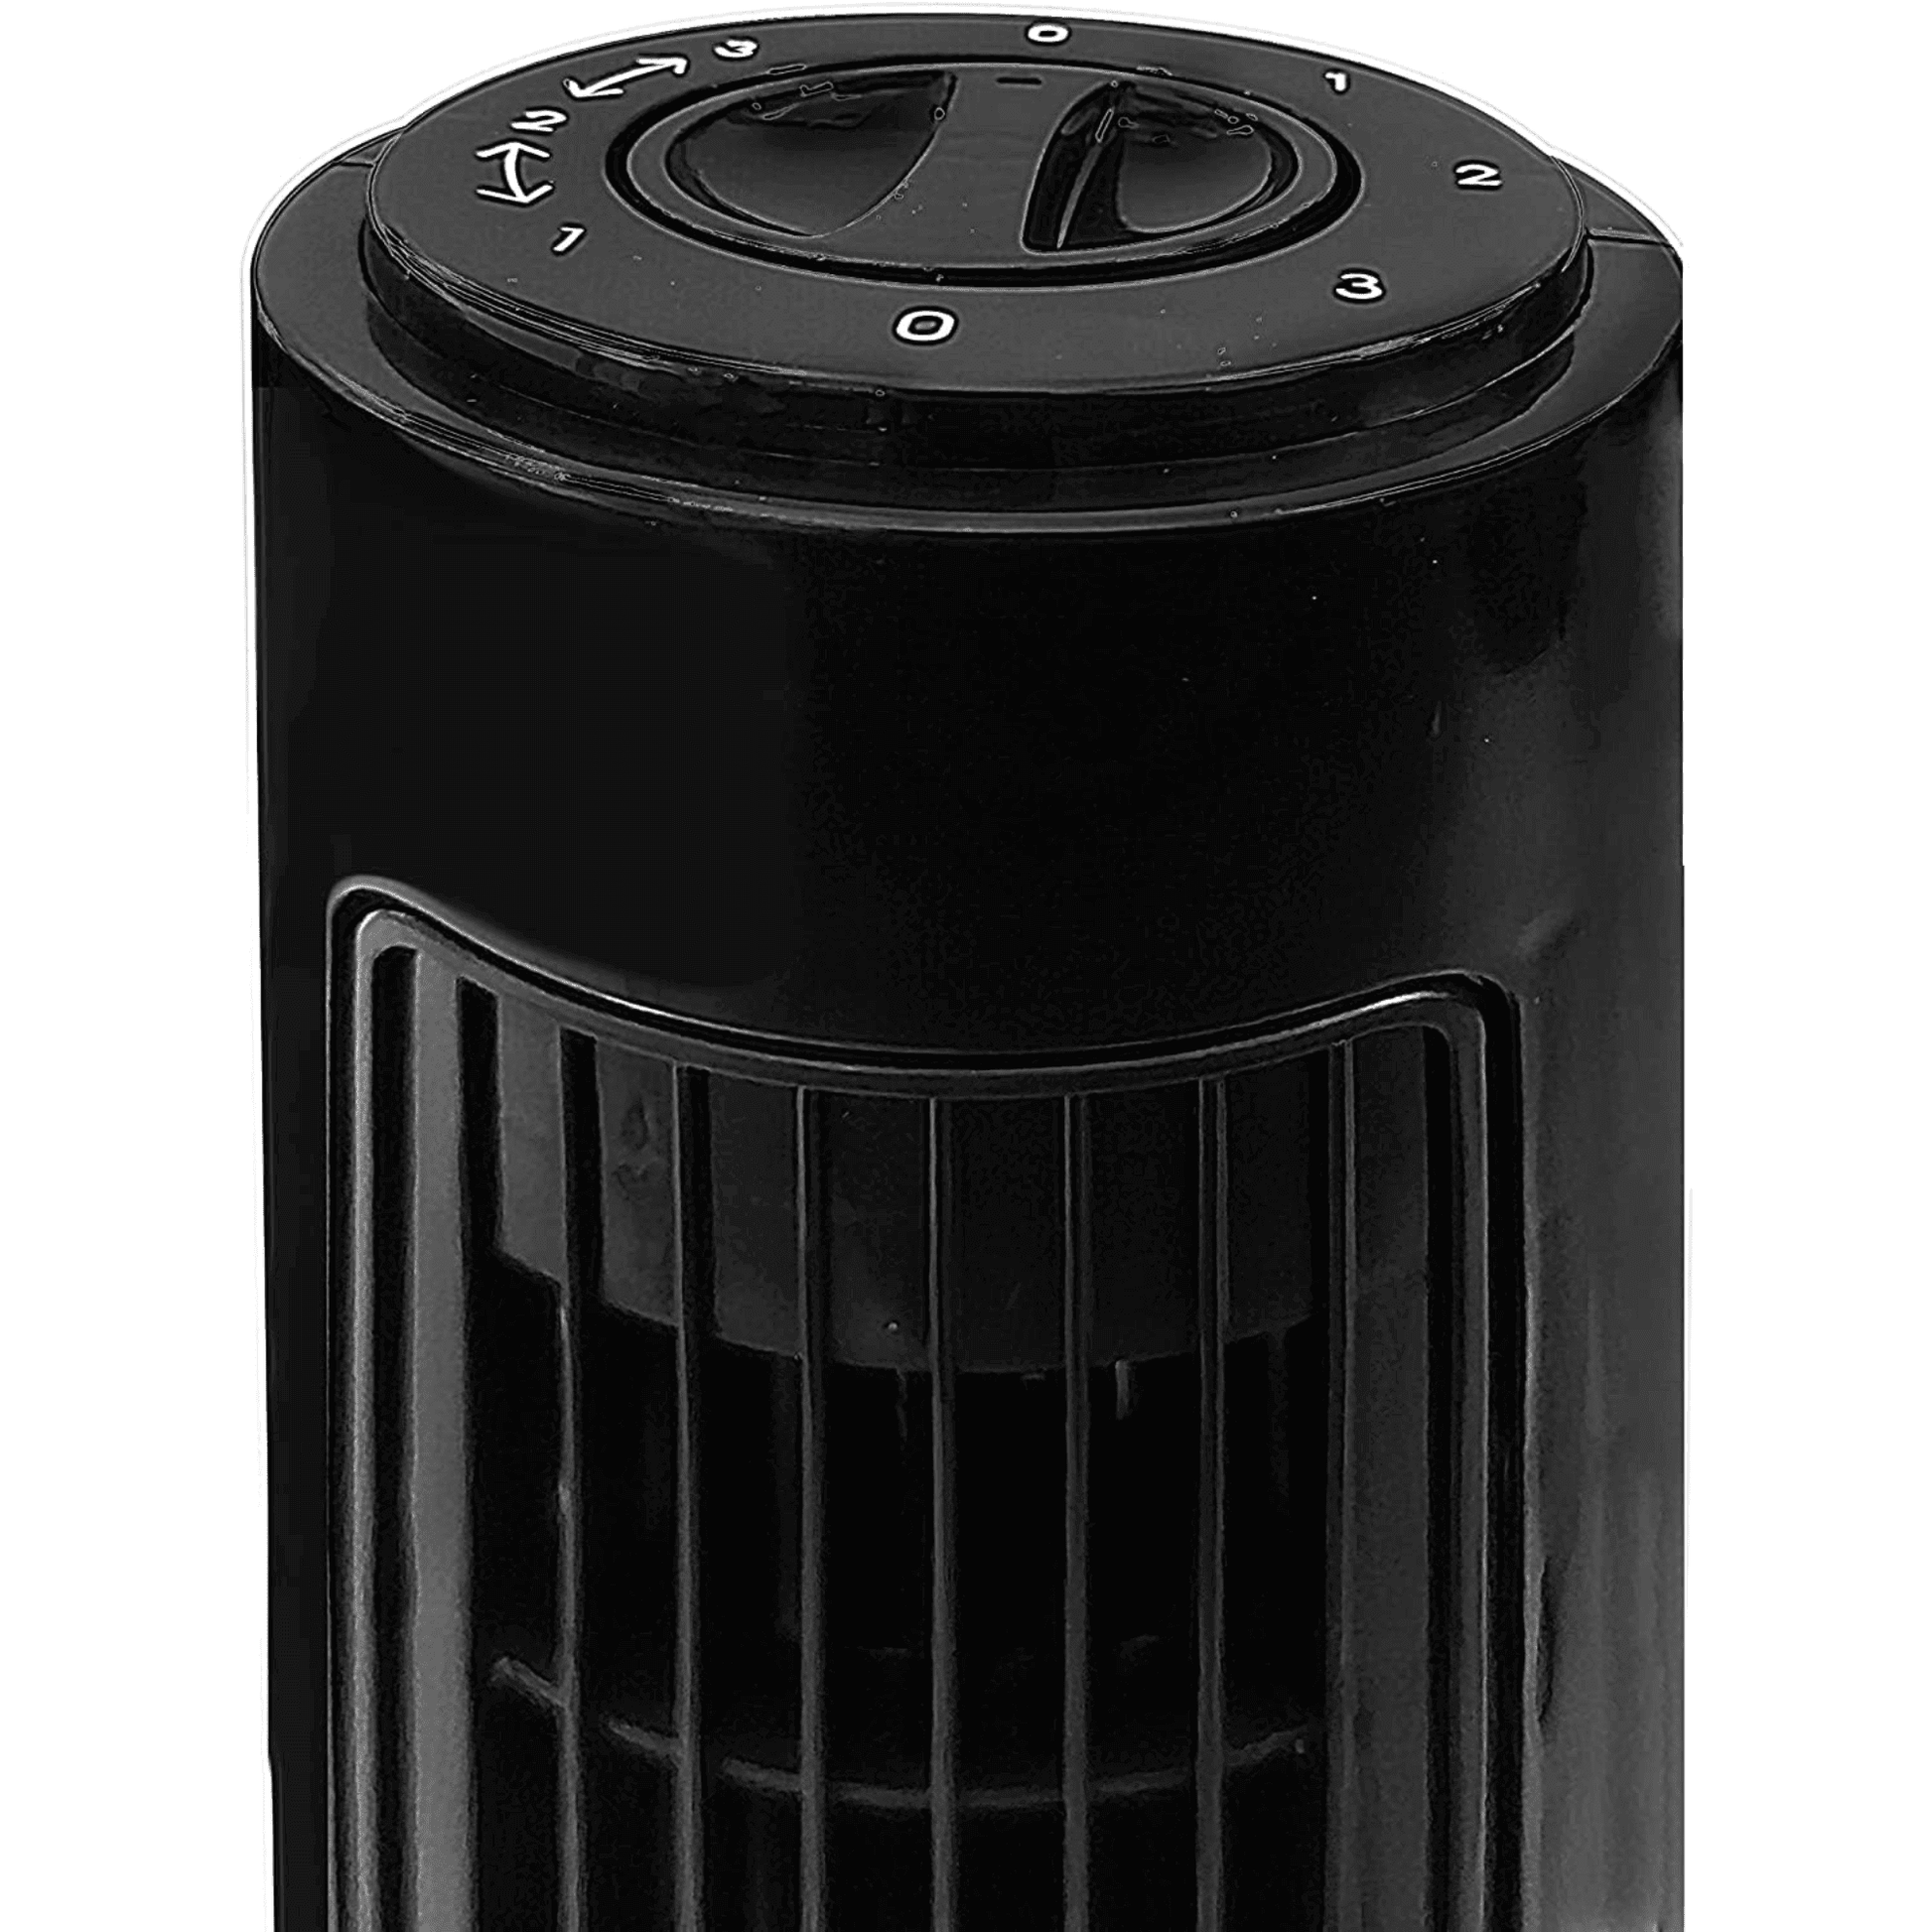 ENYAA 29 INCH TOWER FAN TS2911A - PERFECT HOME COOLING SOLUTION BLACK